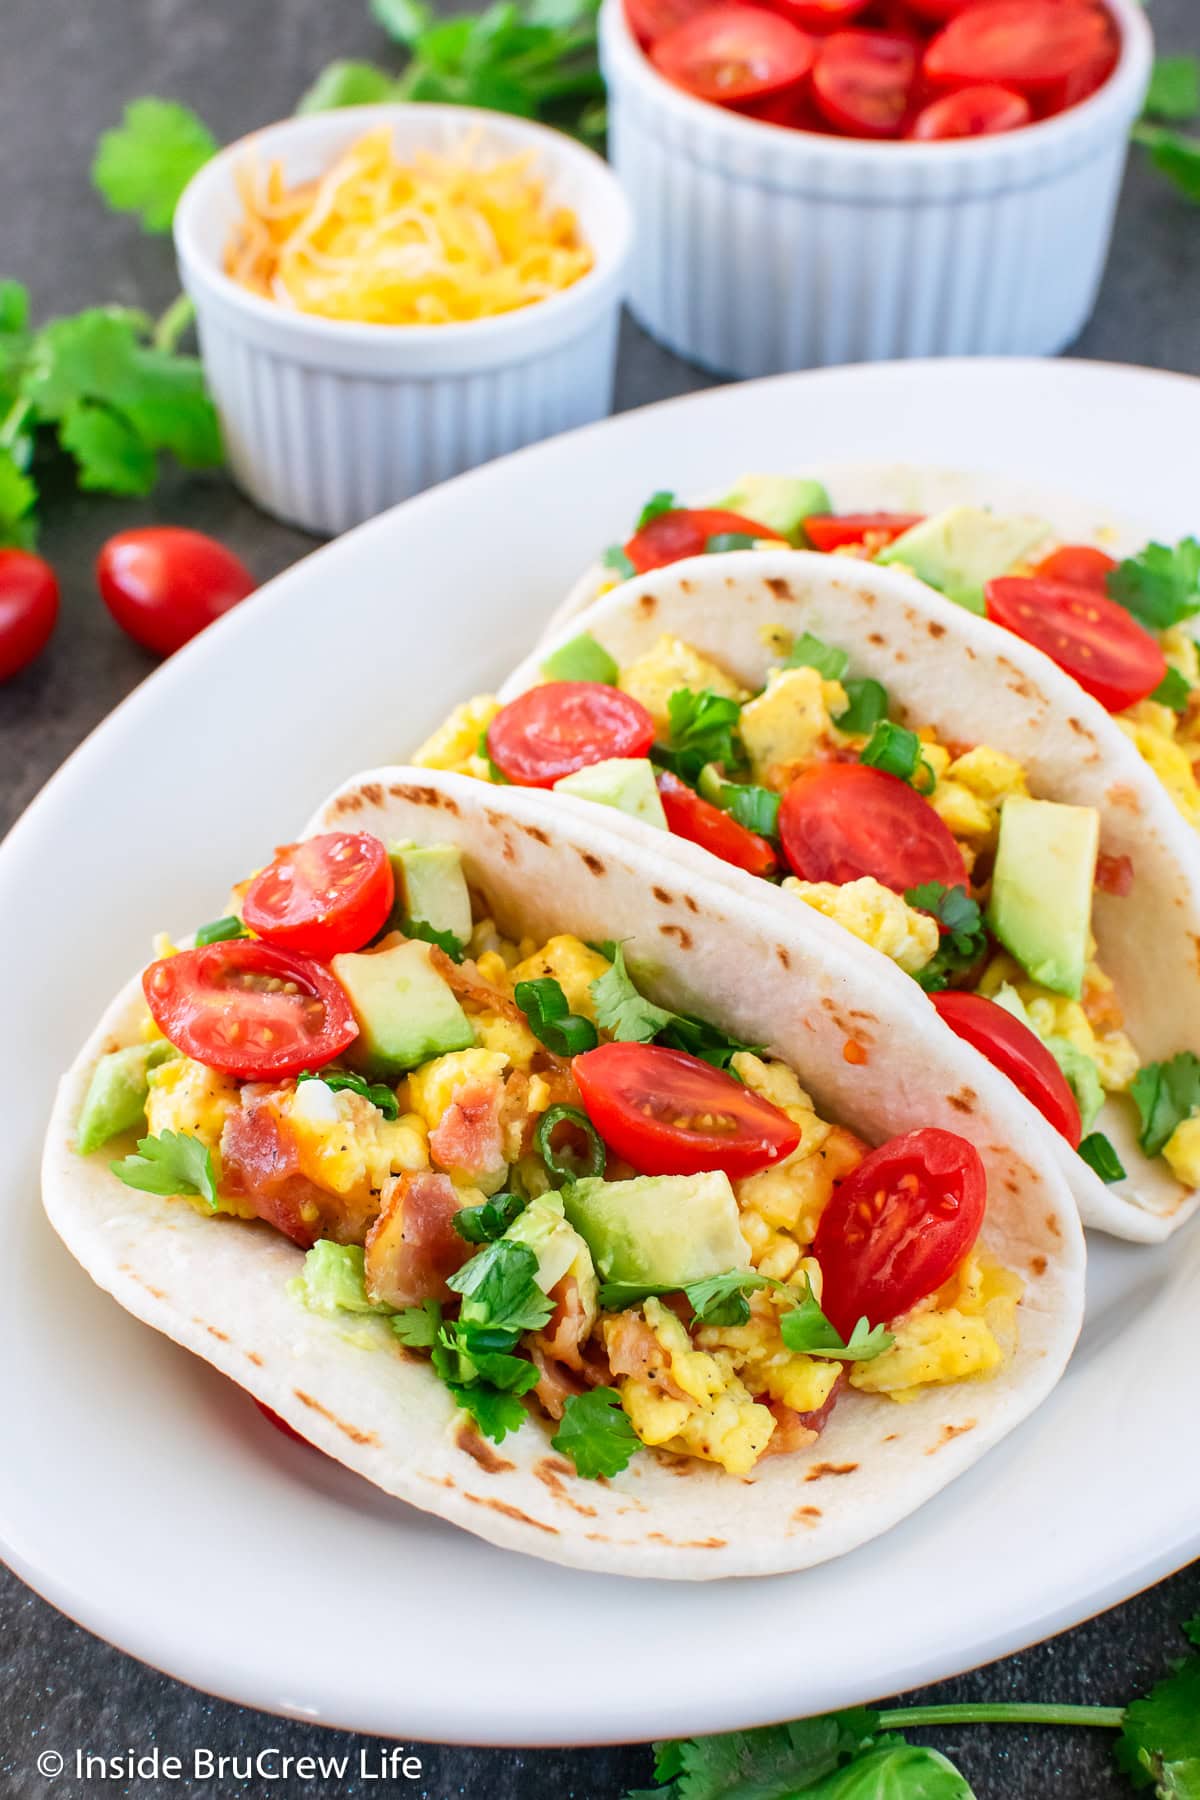 A plate filled with egg tacos with bacon and tomatoes.